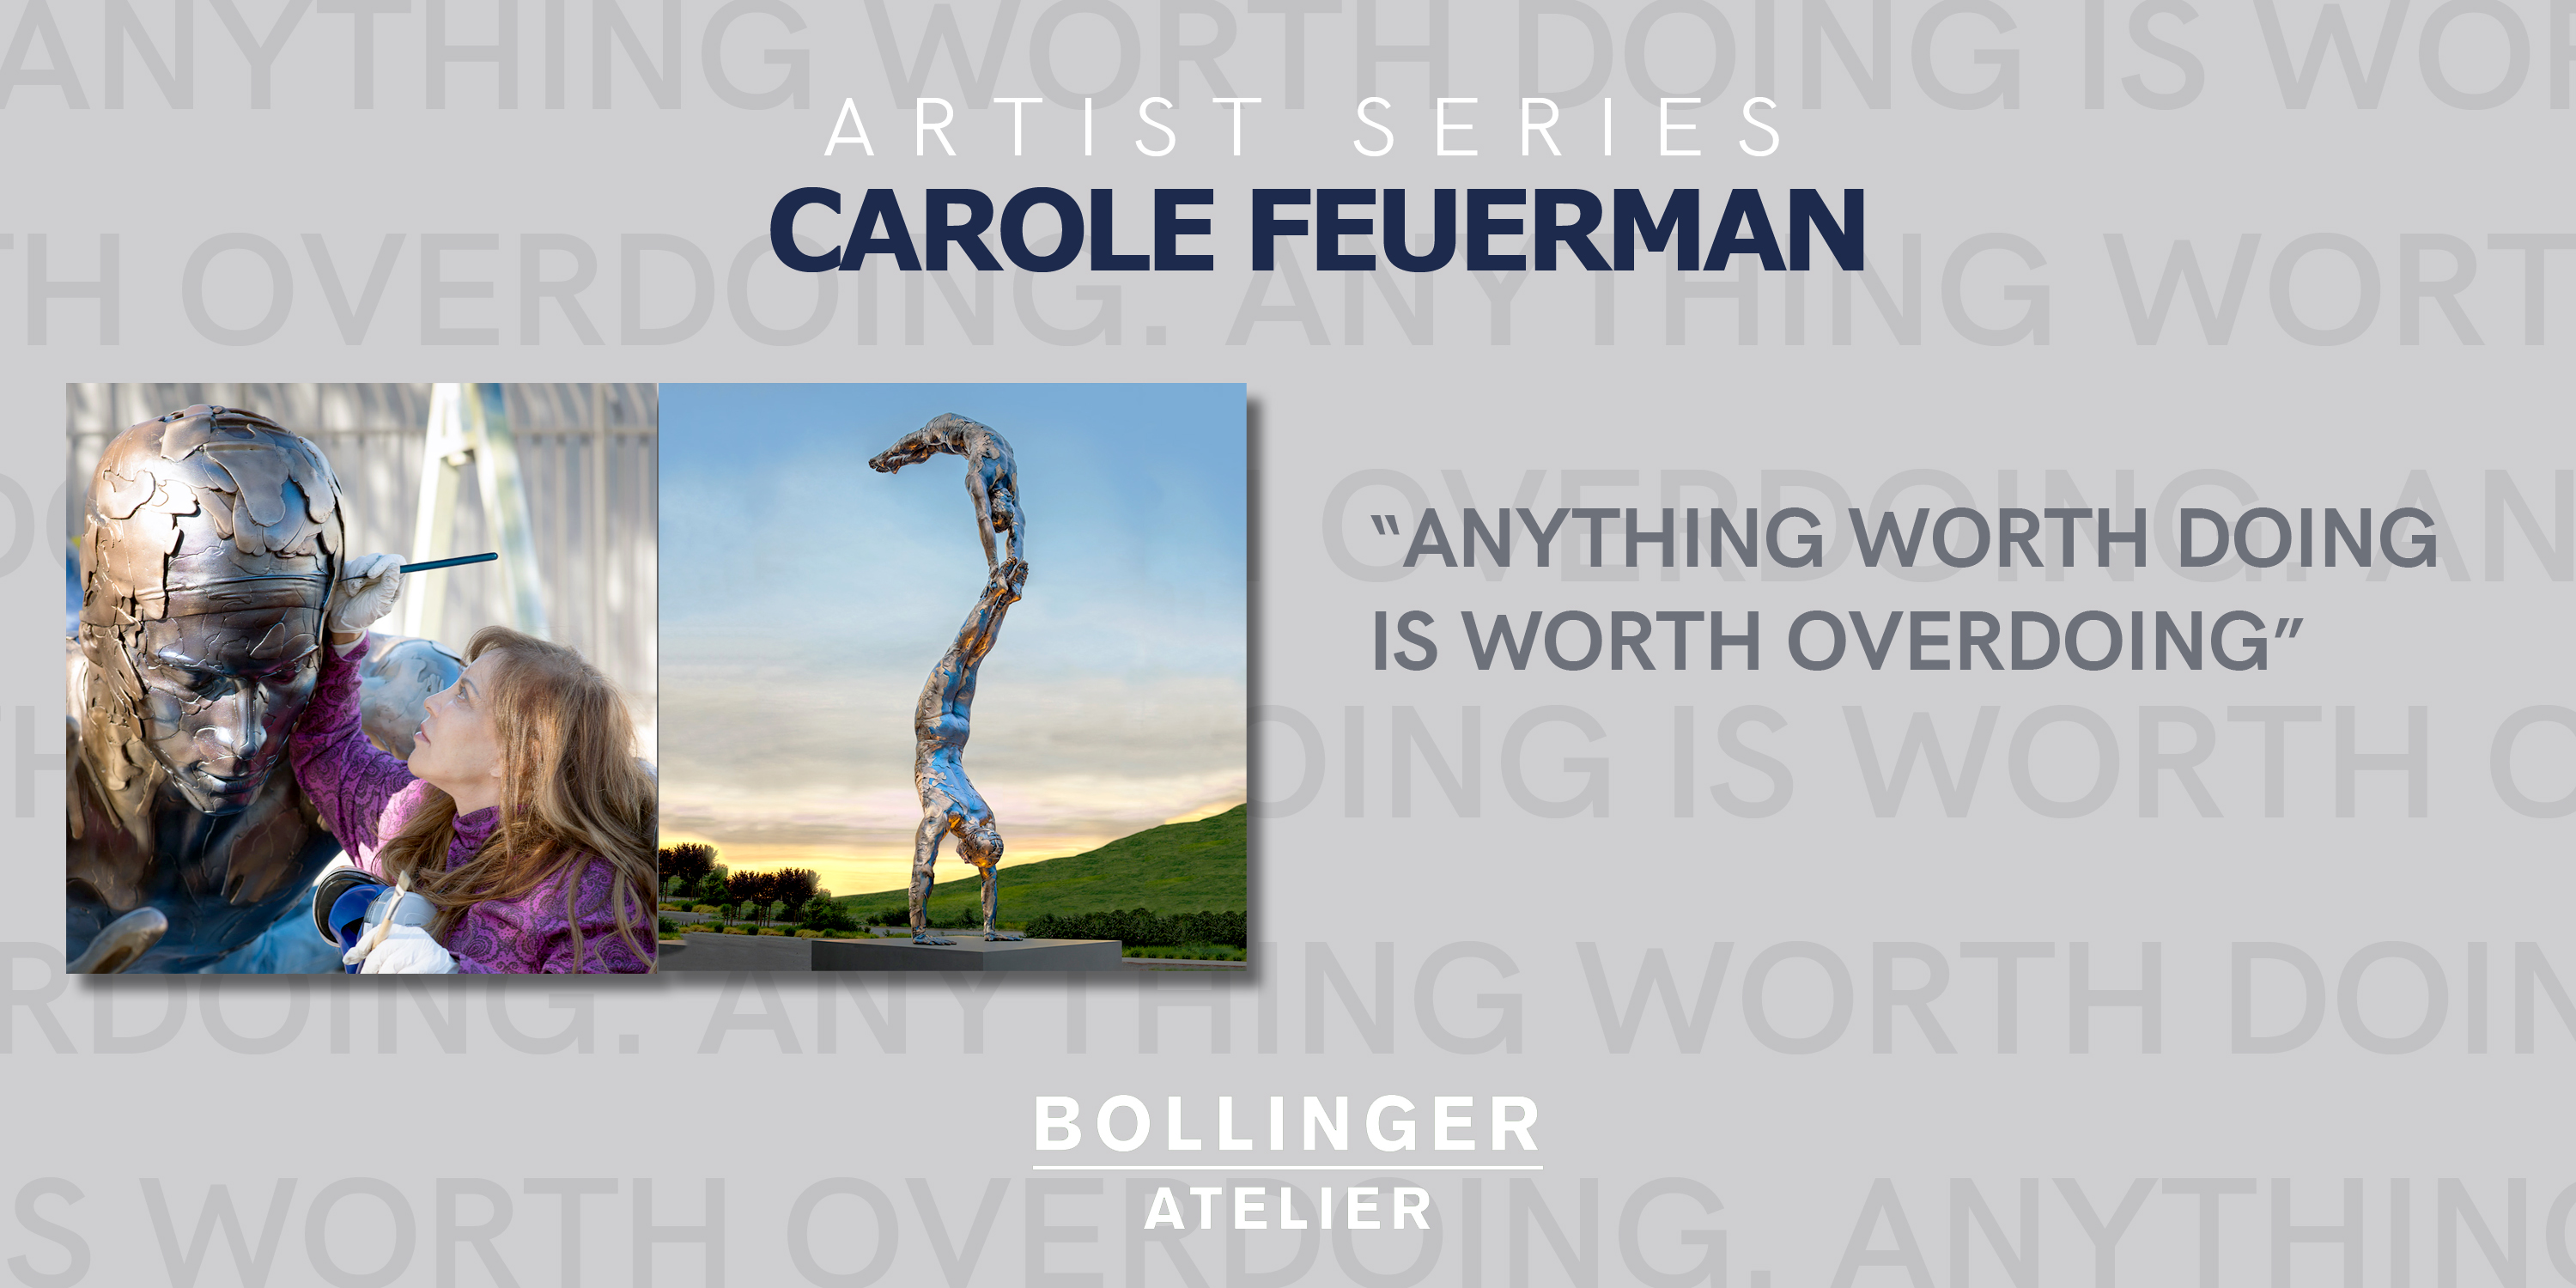 You are currently viewing Carole Feuerman x Bollinger Atelier